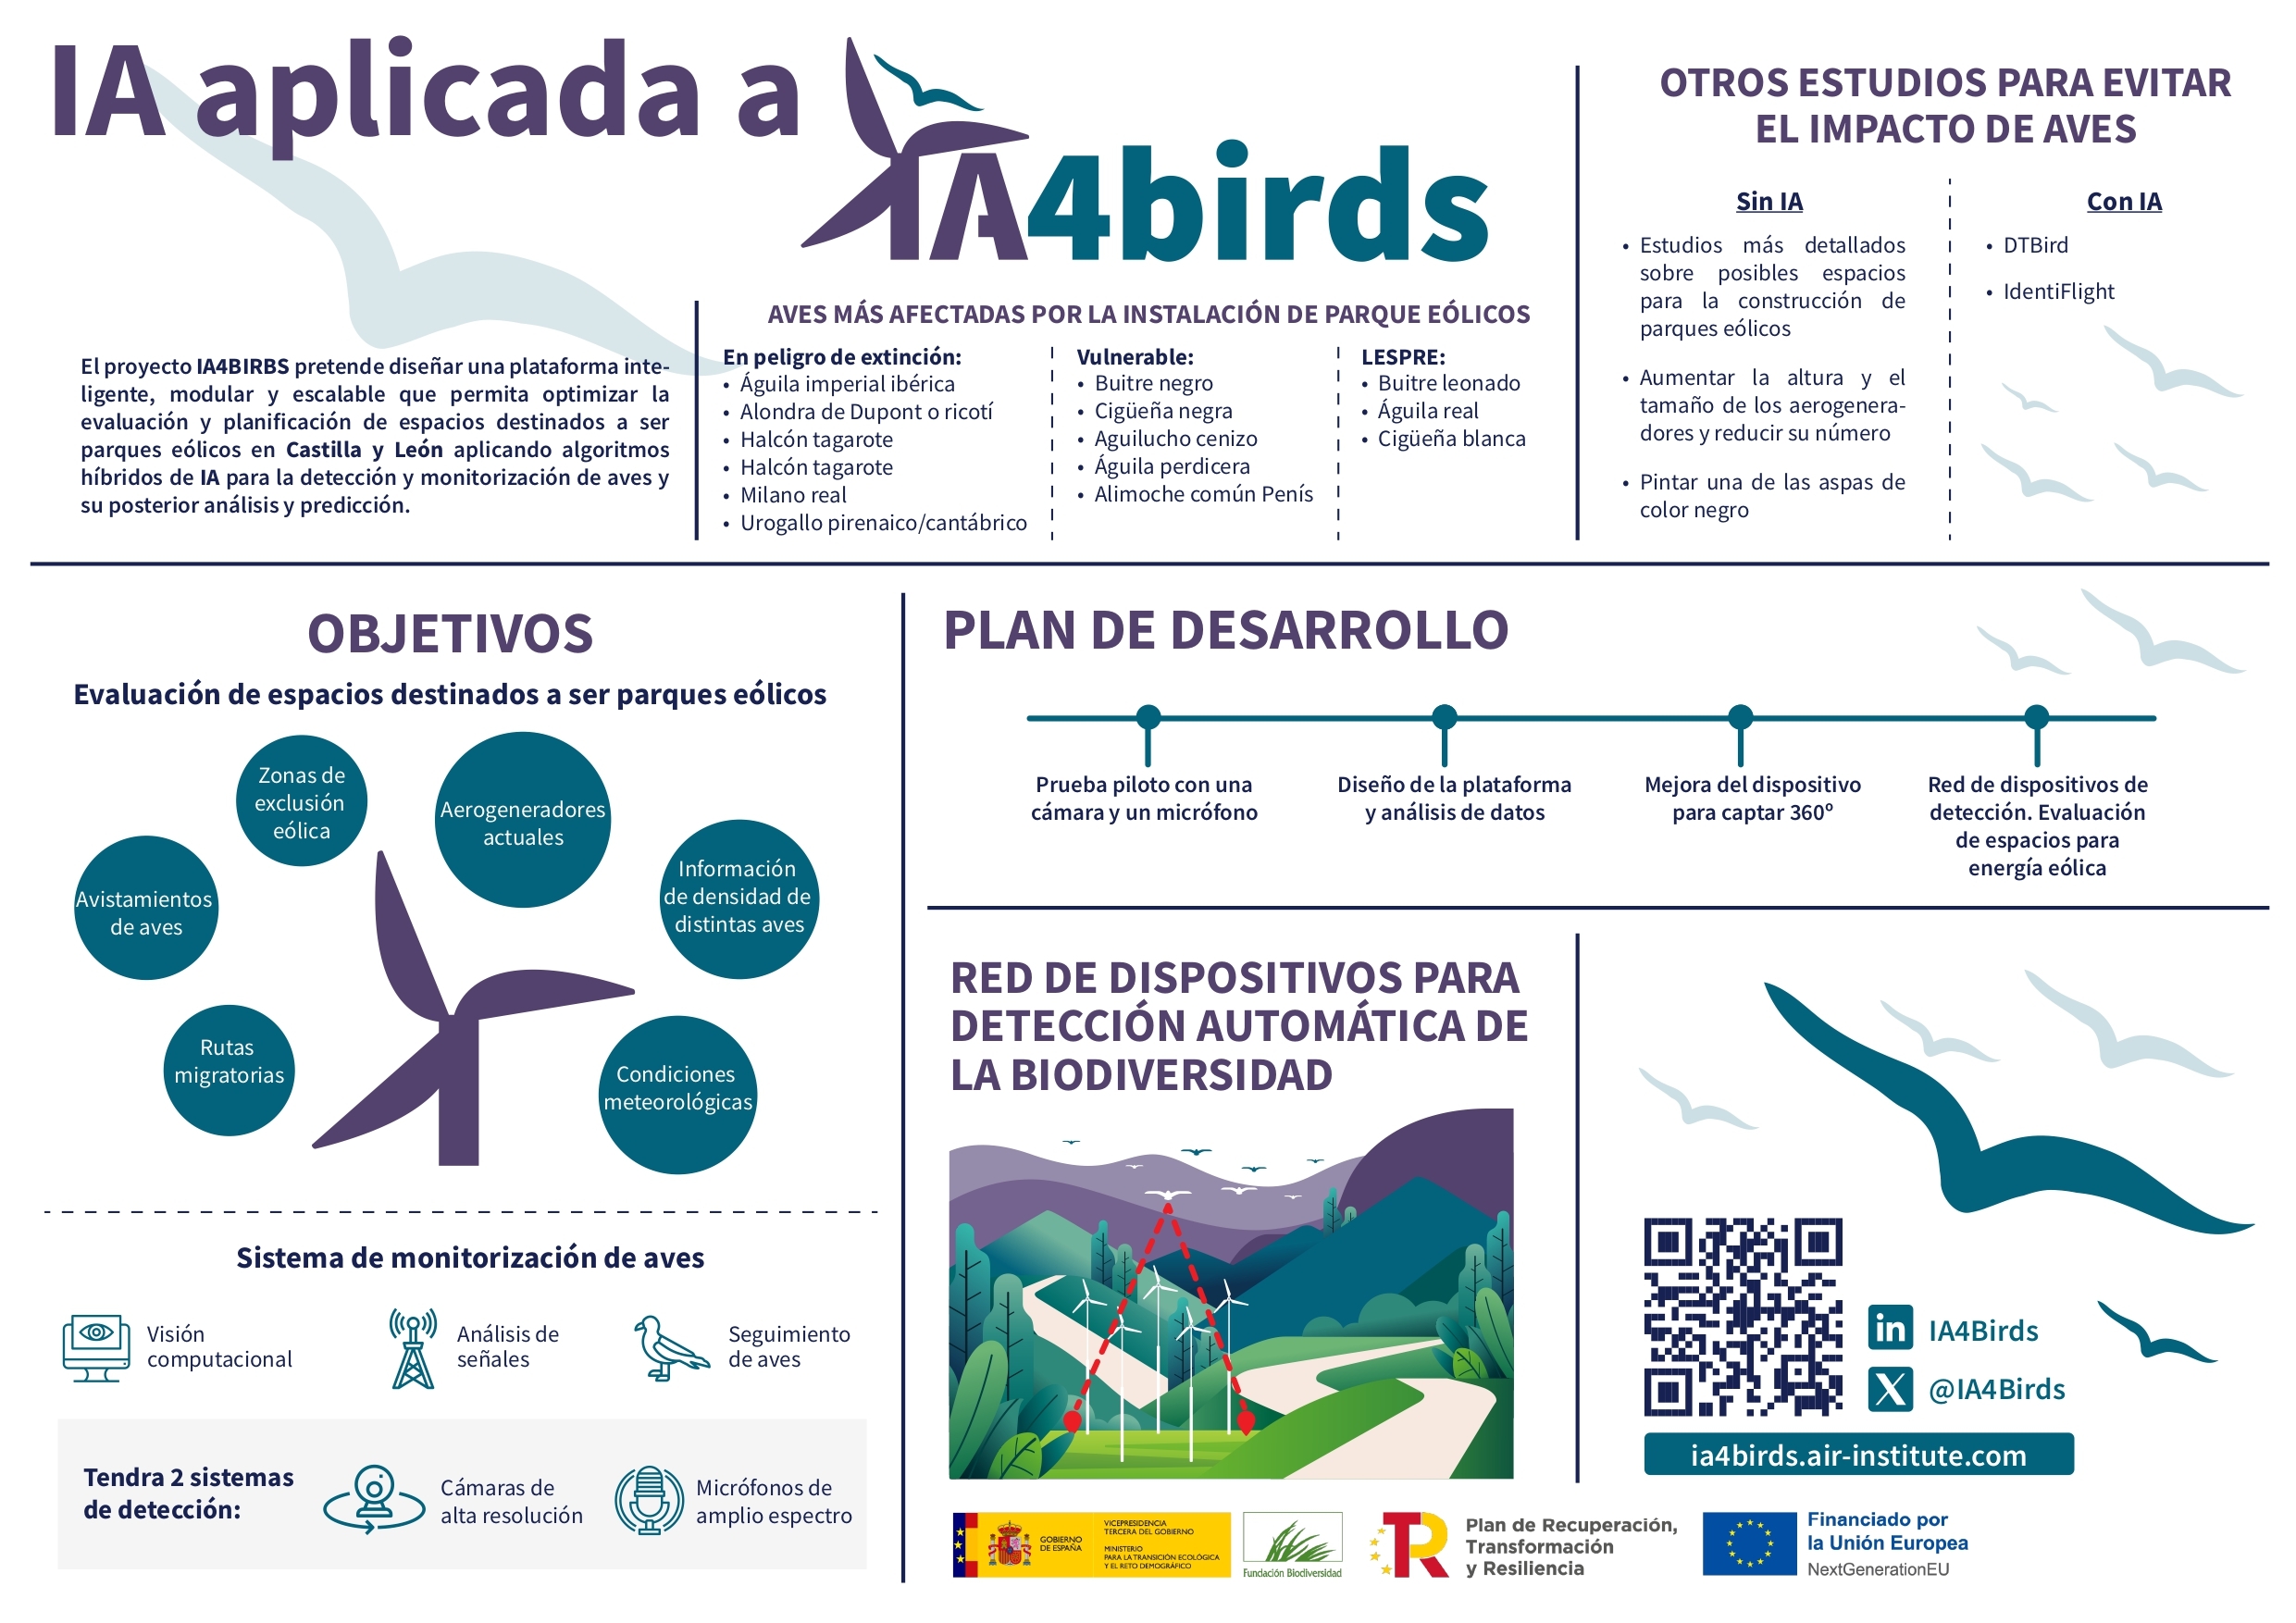 With IA4Birds, information flies! Discover our project with a simple glance at our infographic